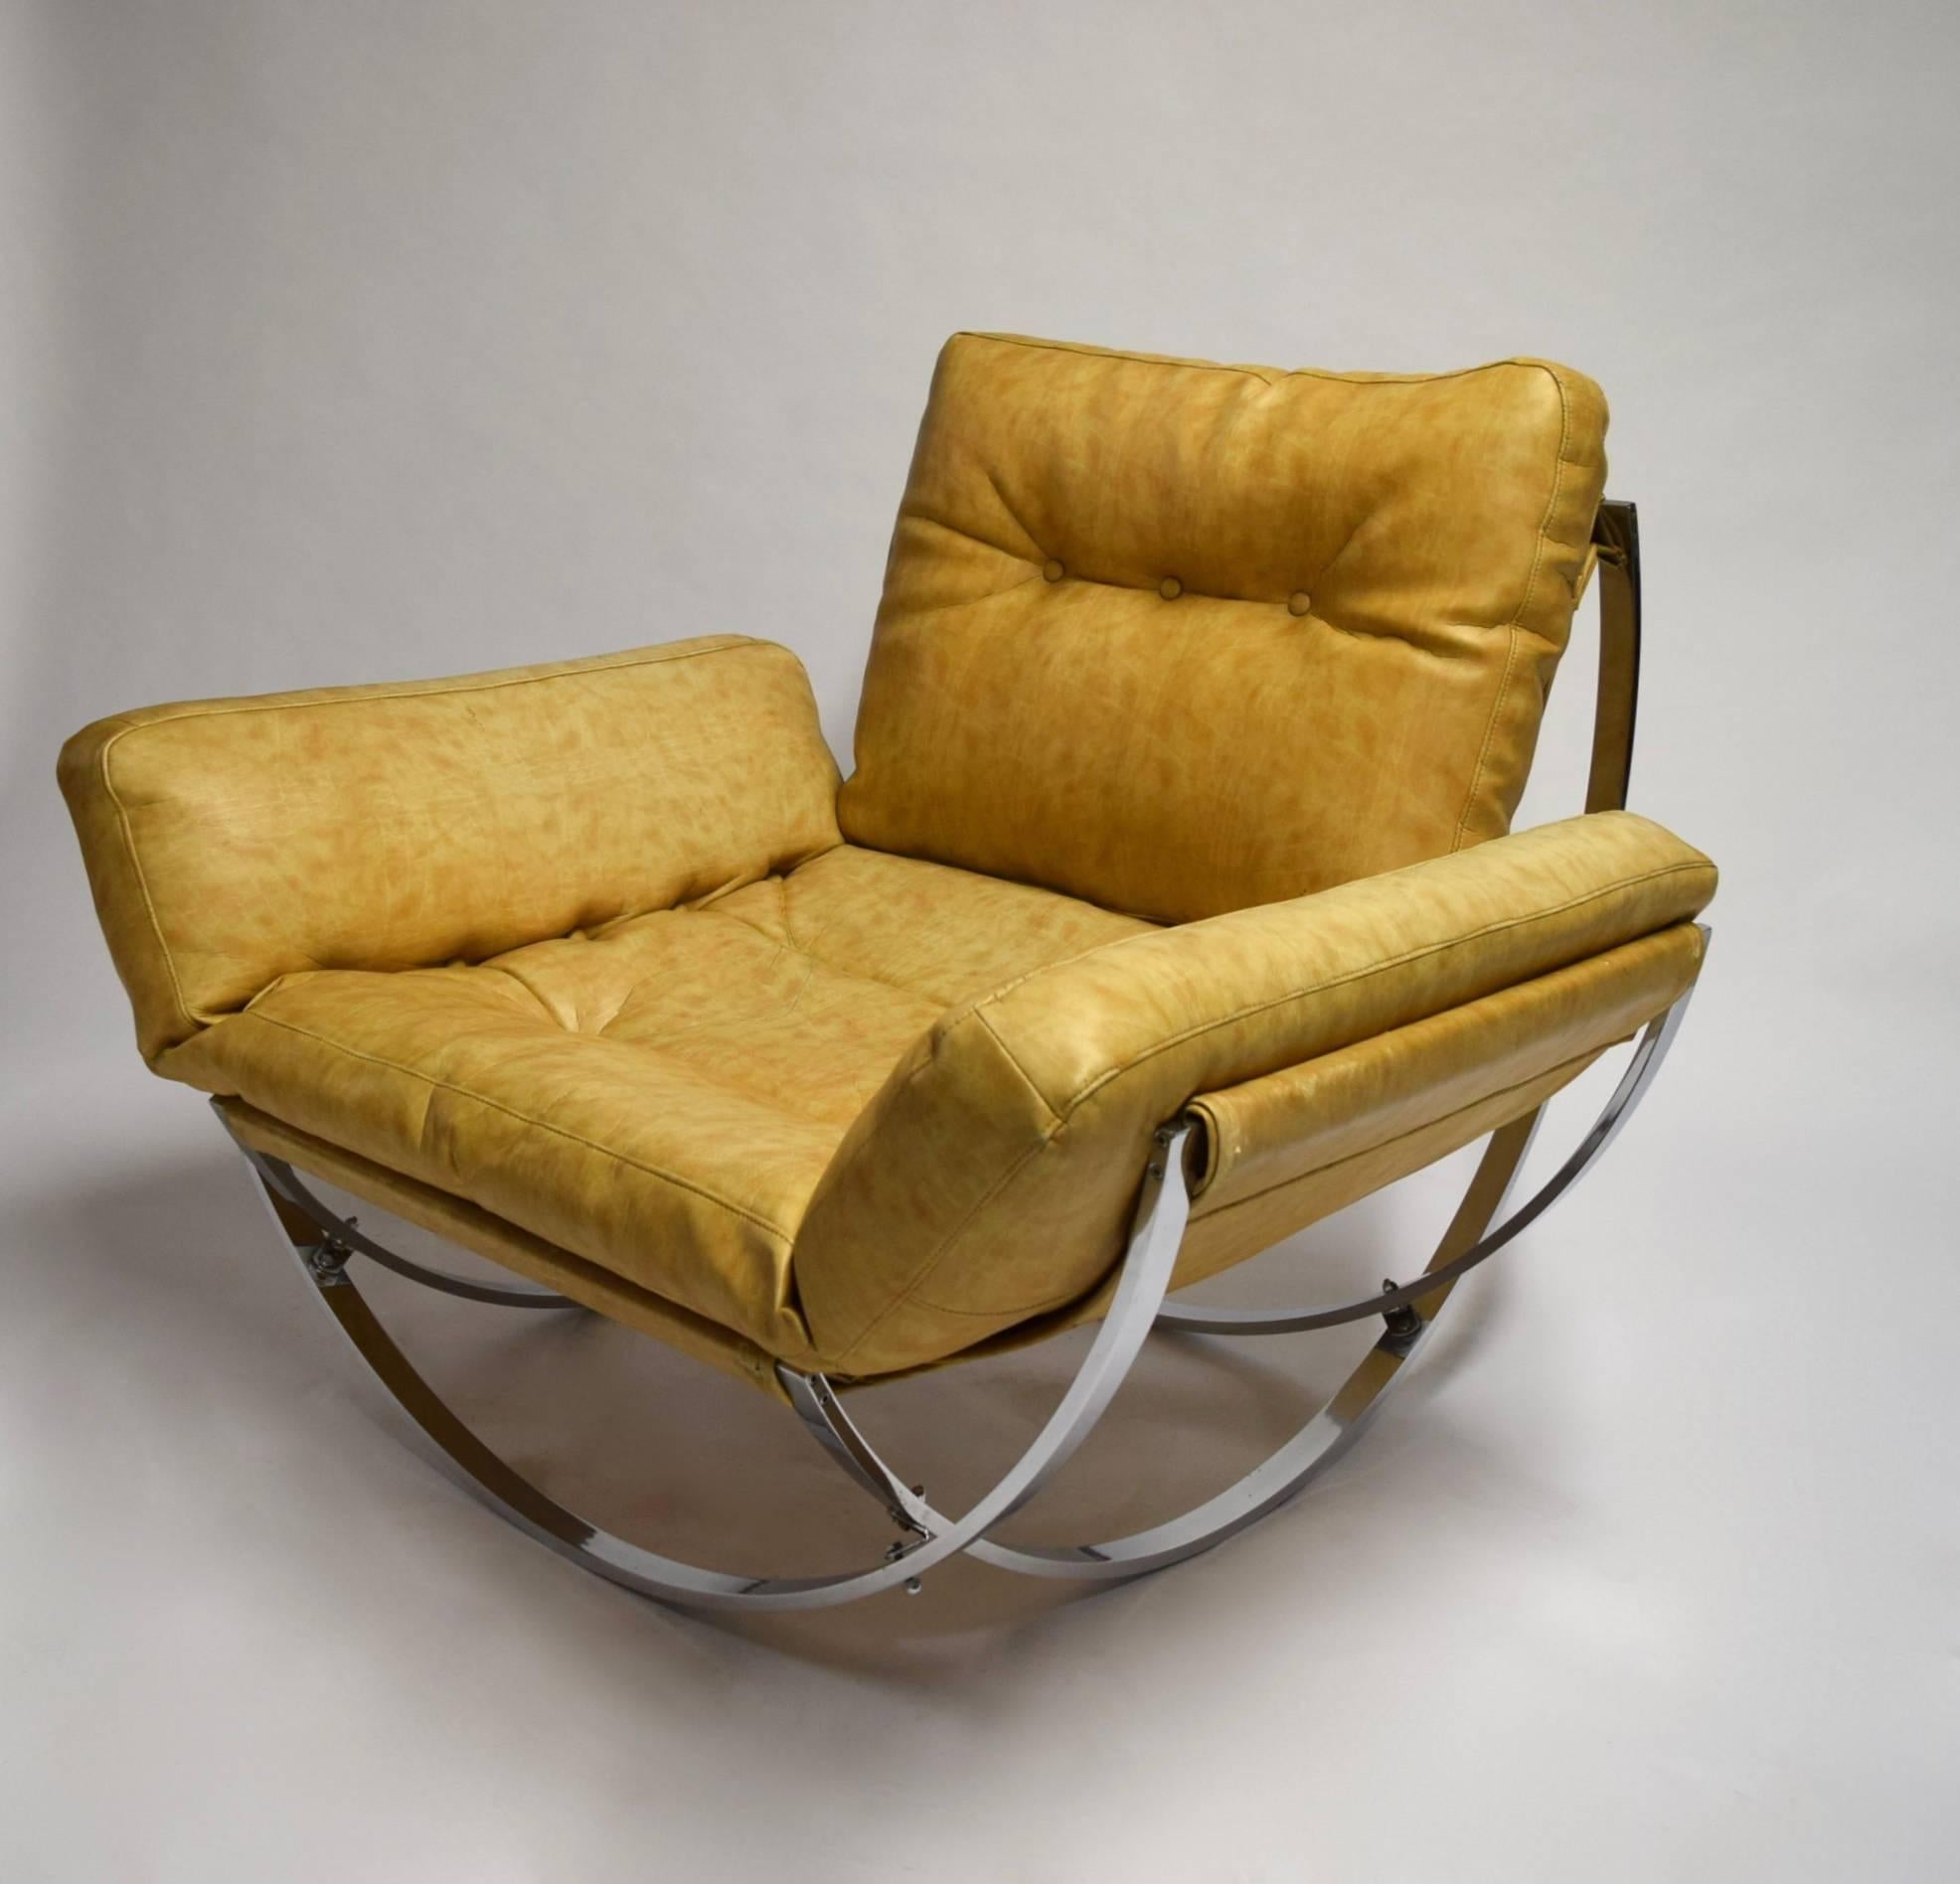 Very sturdy and comfortable Italian lounge chair with a polished chrome-plated steel frame with an upholstered seat and cushions. The curved design of the frame visually resembles a rocking chair function, however, the chair is stationary.
Measures: